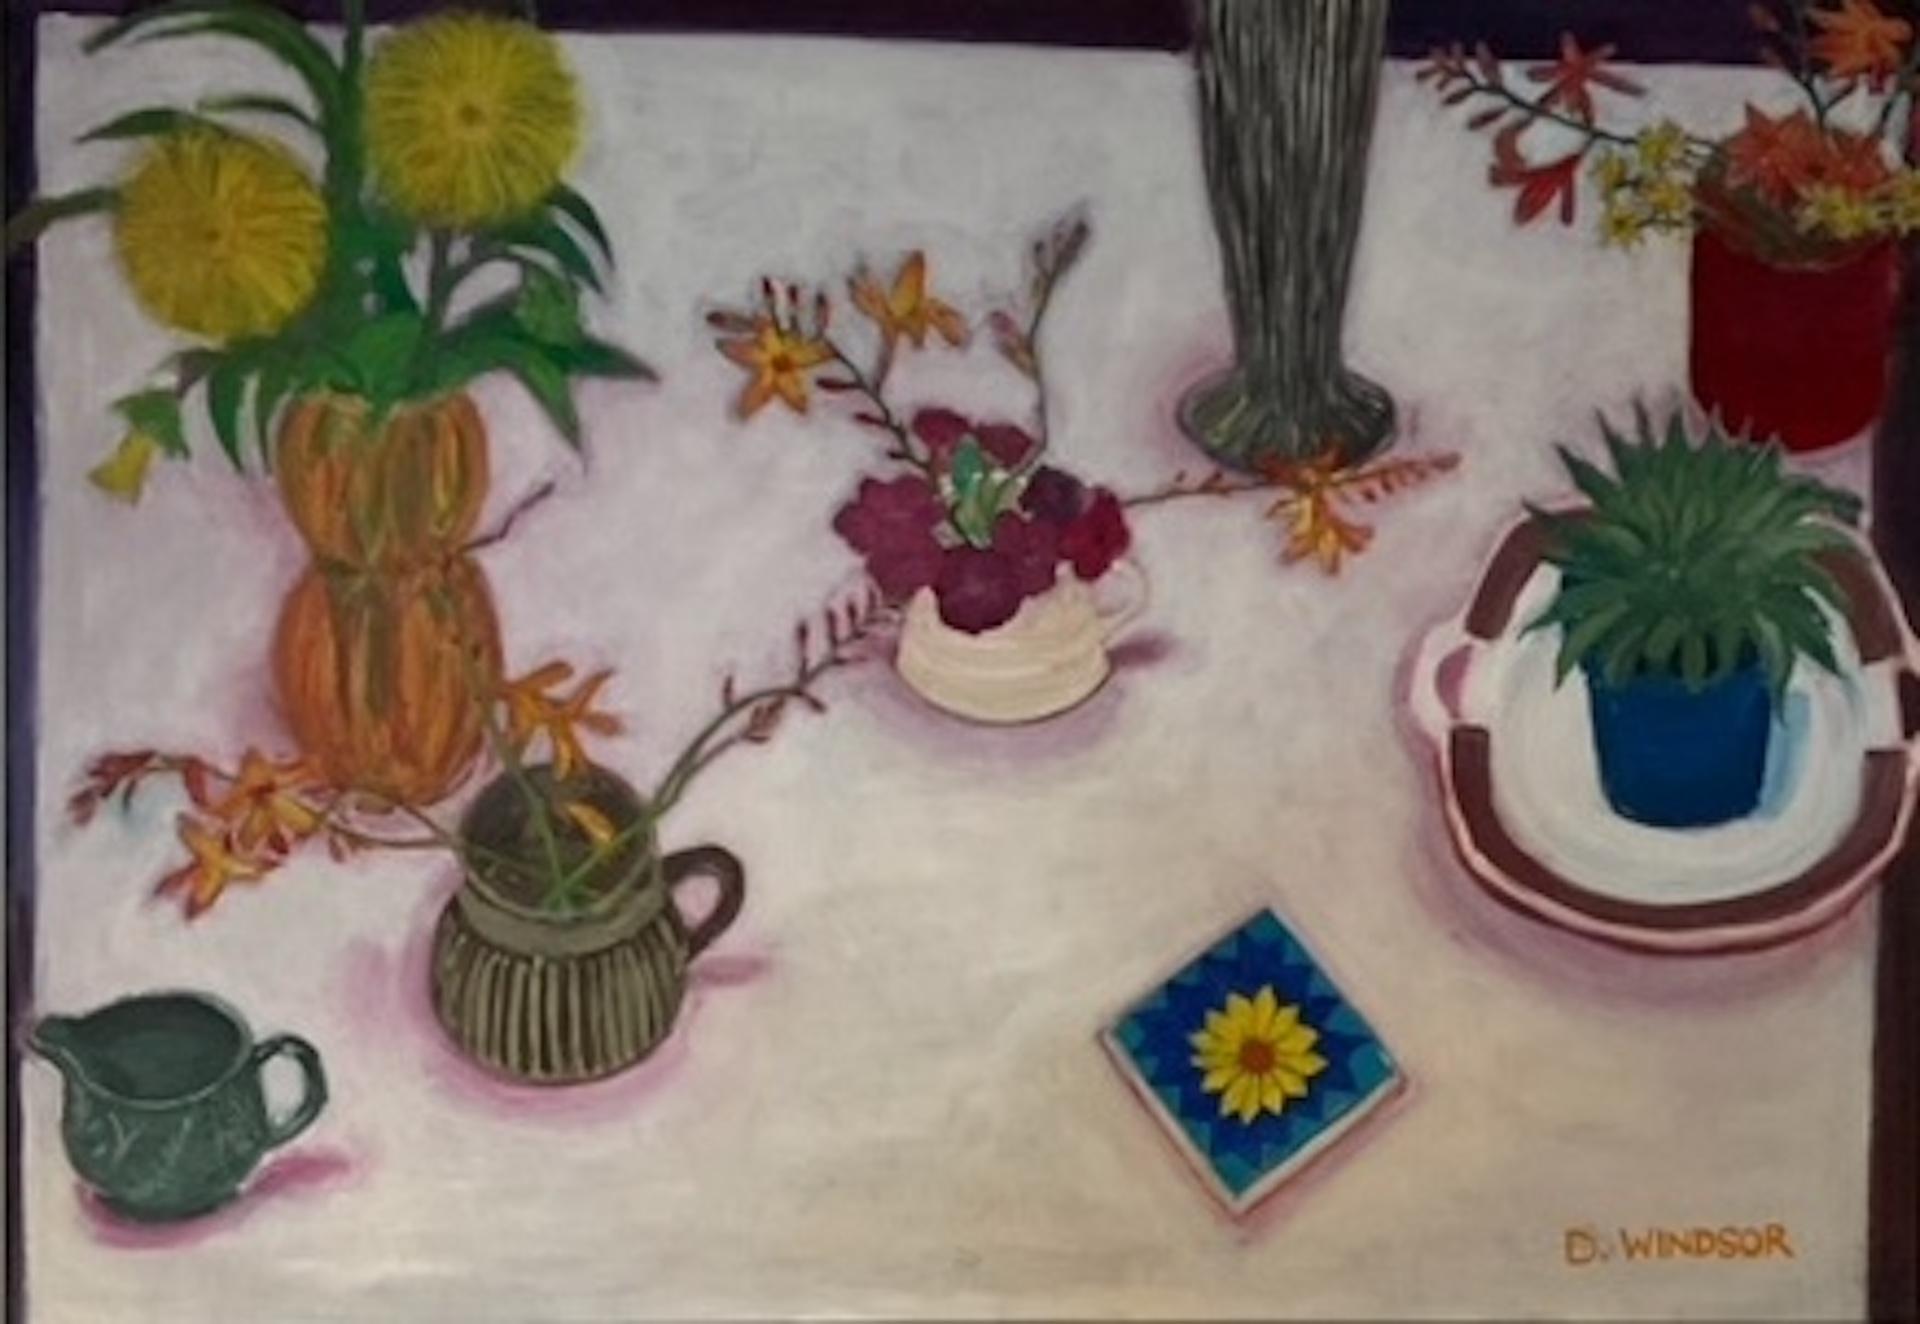 'Still Life on a White Tablecloth' is an original painting by Deborah Windsor. It is a delightful small vases of summer flowers, a cactus and other objects sit on a crisp white tablecloth in this large Still Life painting. Contained in an elegant